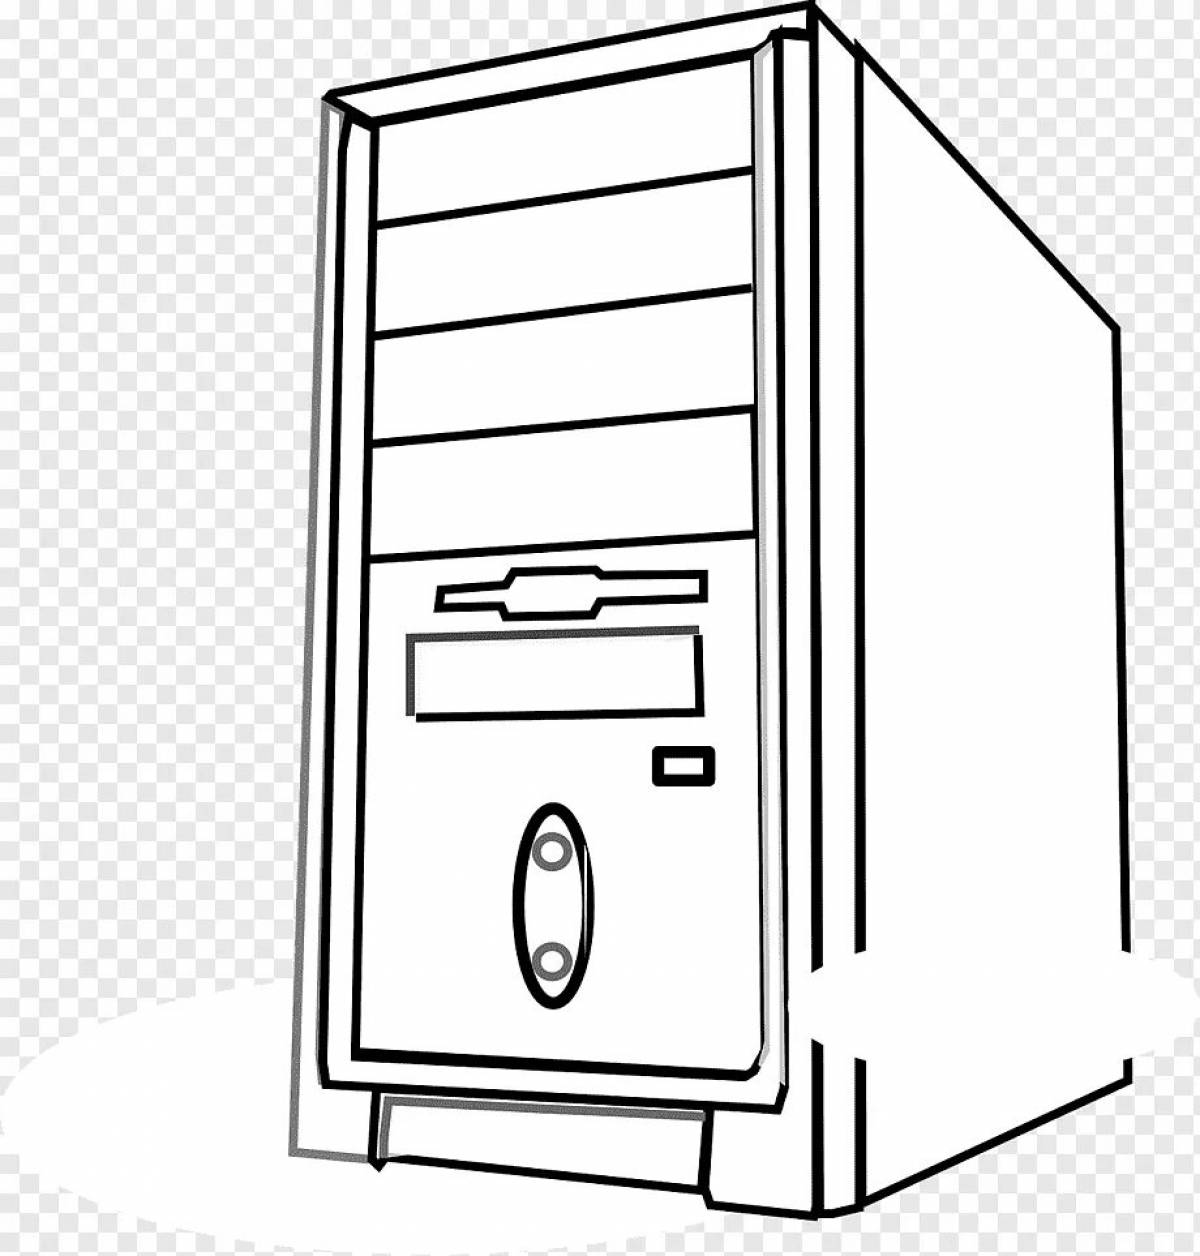 Coloring page with attractive pc case